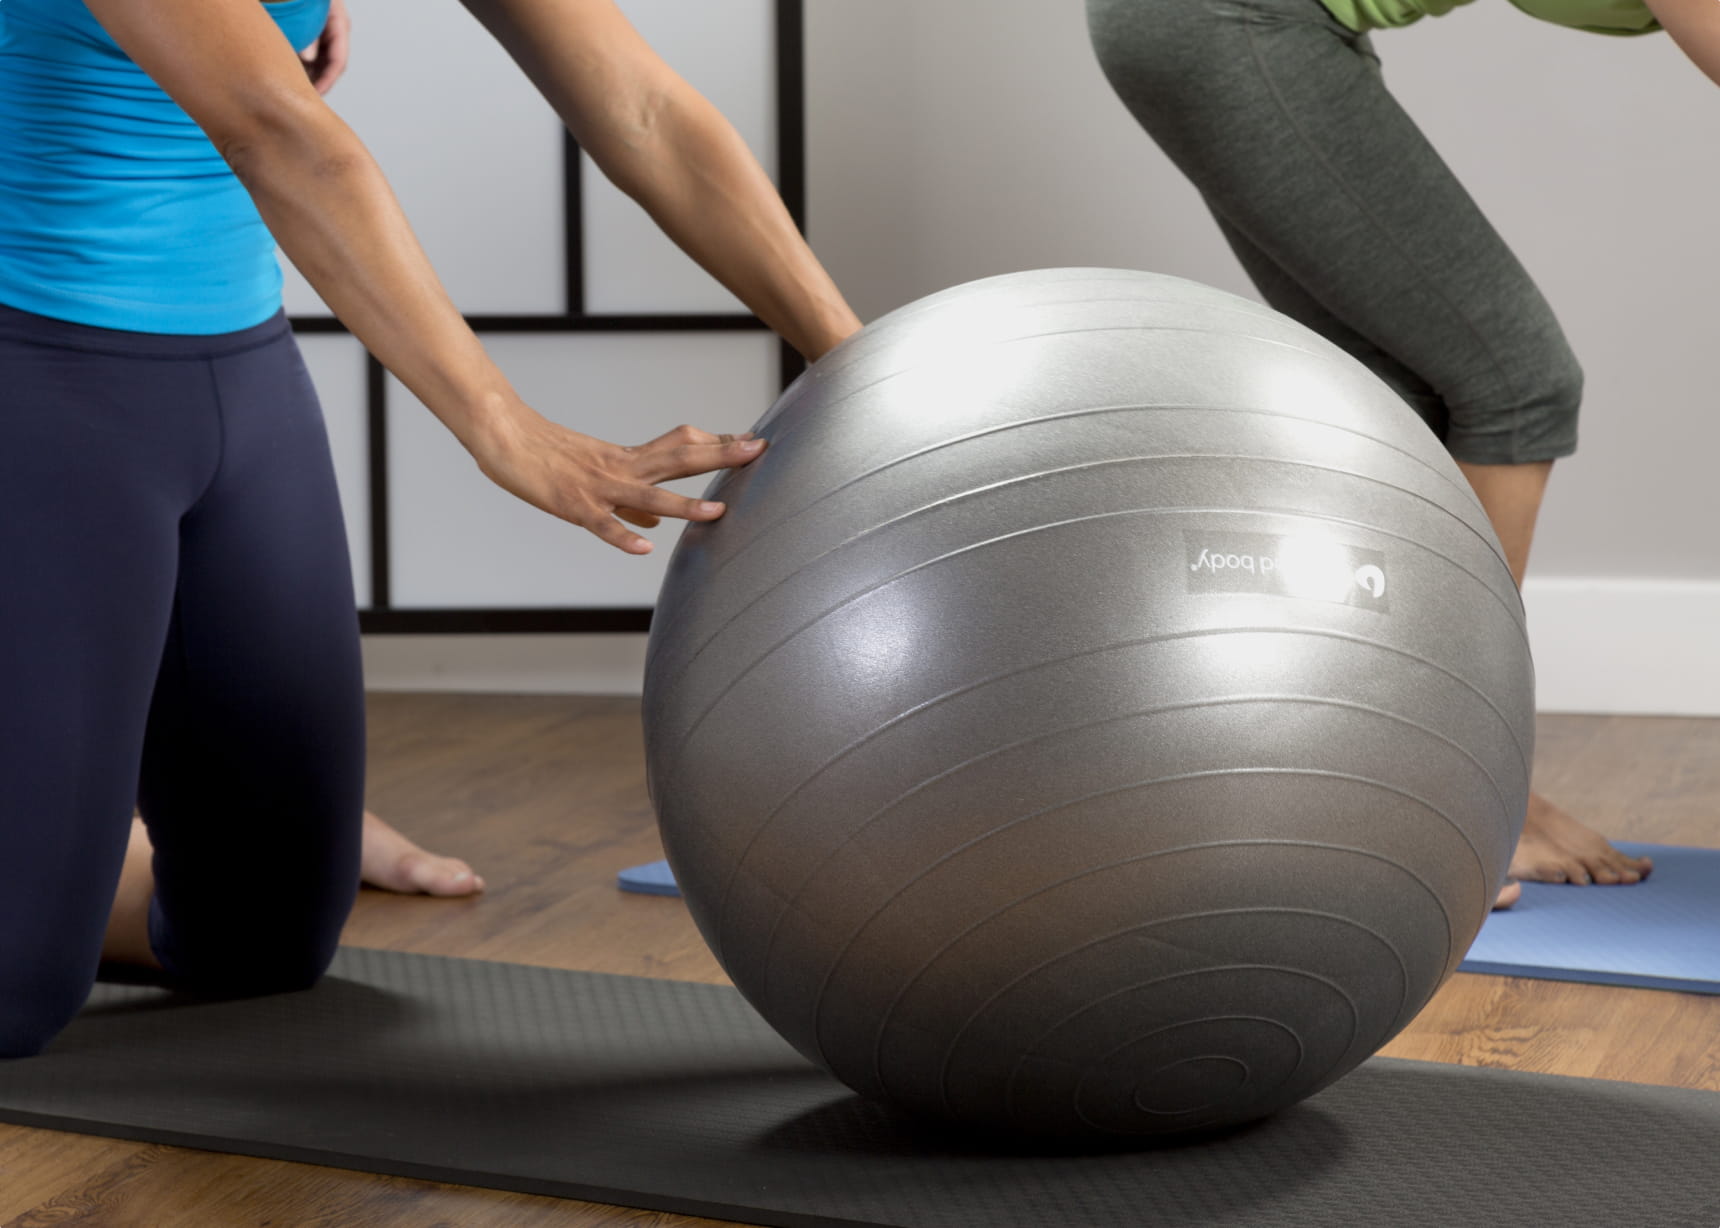 teenager kneeling out of frame leaning in with hands on a large gray fitness ball during a Pilates class